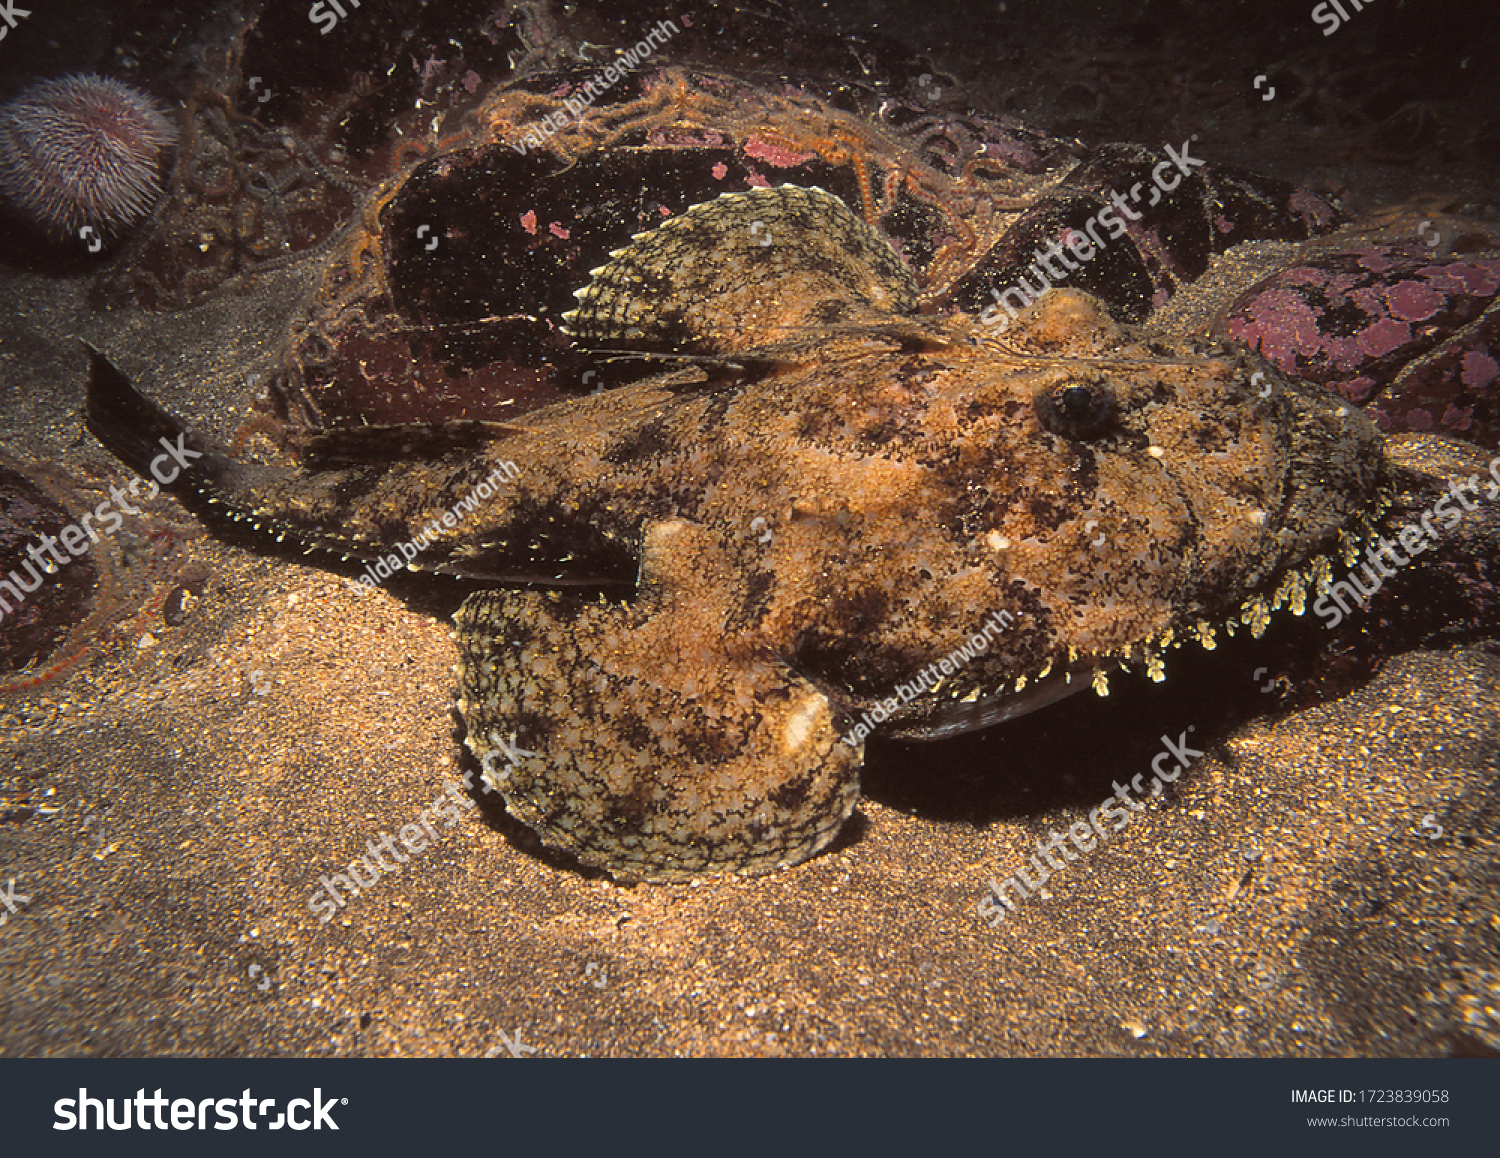 angler fish (also known as monkfish) on sandy sea bed where it is very well camouflaged #1723839058